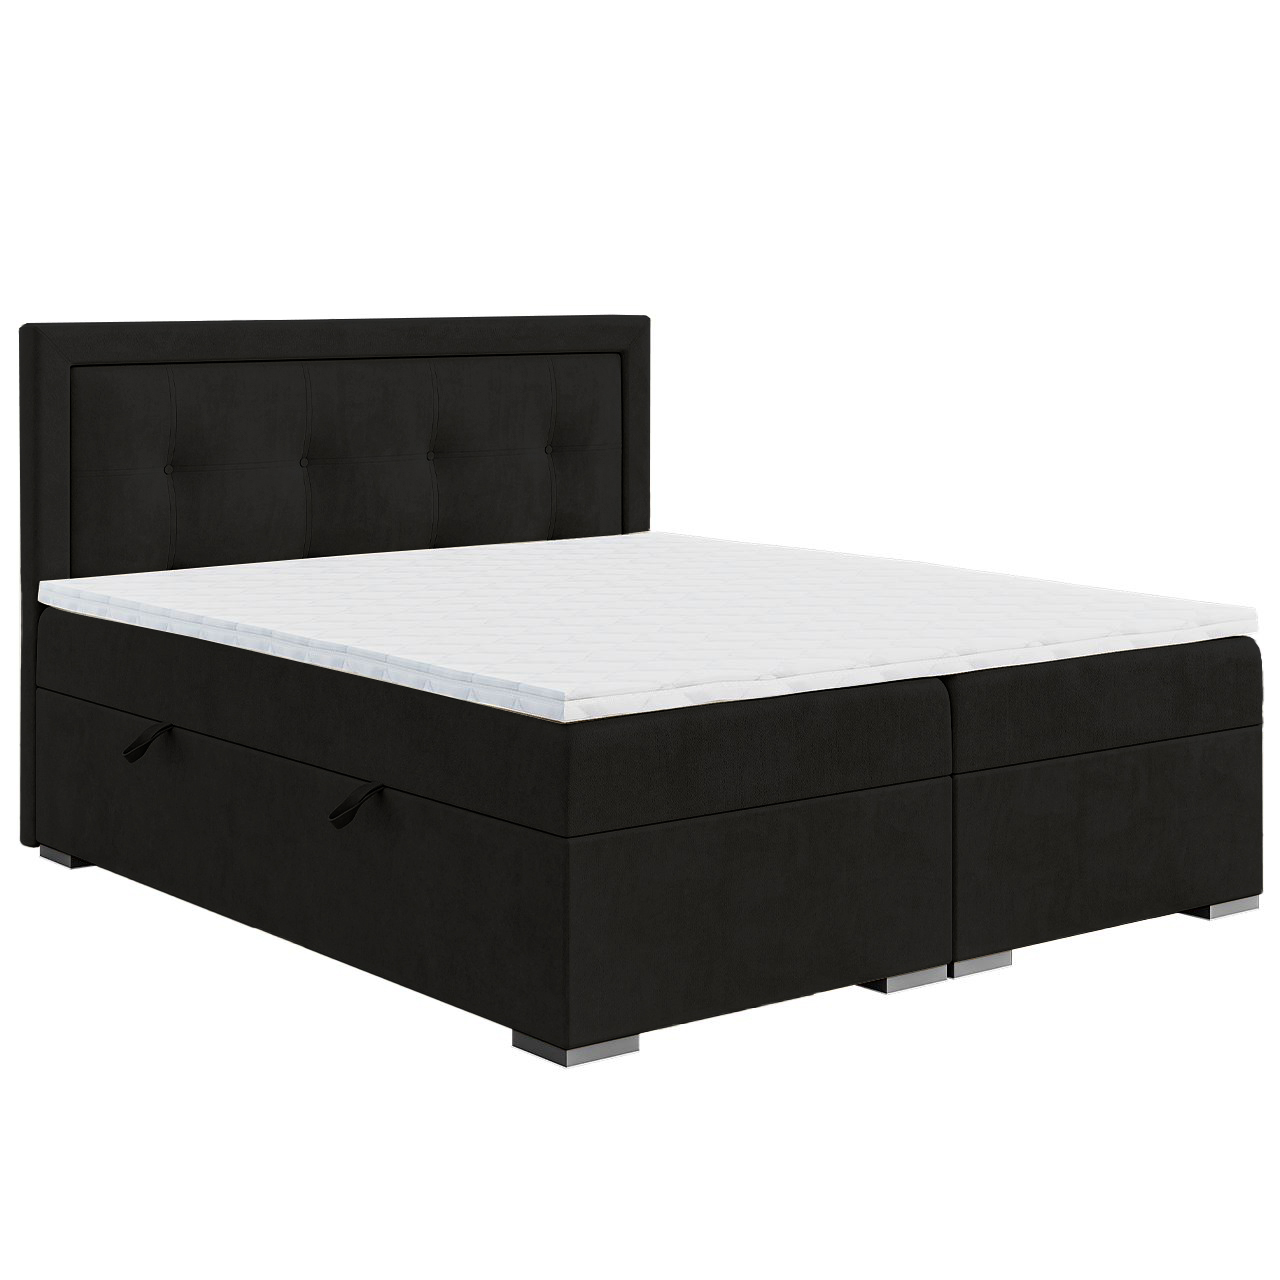 Upholstered bed VERI 180x200 riviera 100